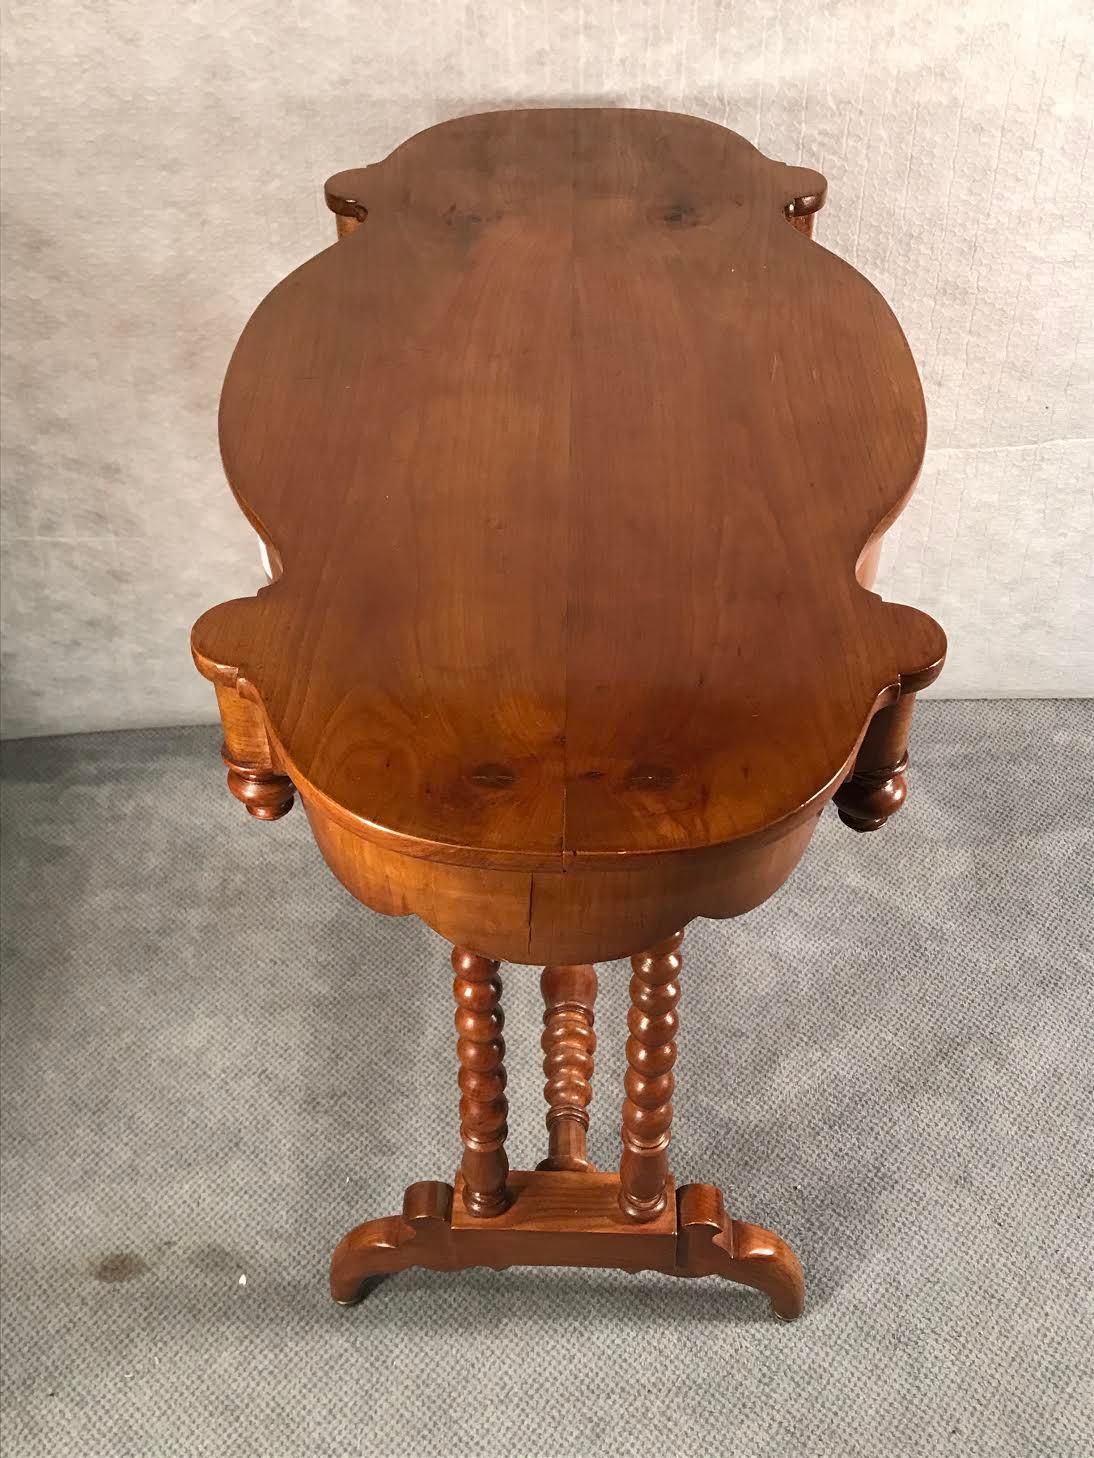 Biedermeier side table, southern Germany, 1830-40 
This very unusual biedermeier side table dates back to around 1830. It comes from Southern Germany or Austria. 
The beautifully curved table top and apron are decorated with cherry veneer. The